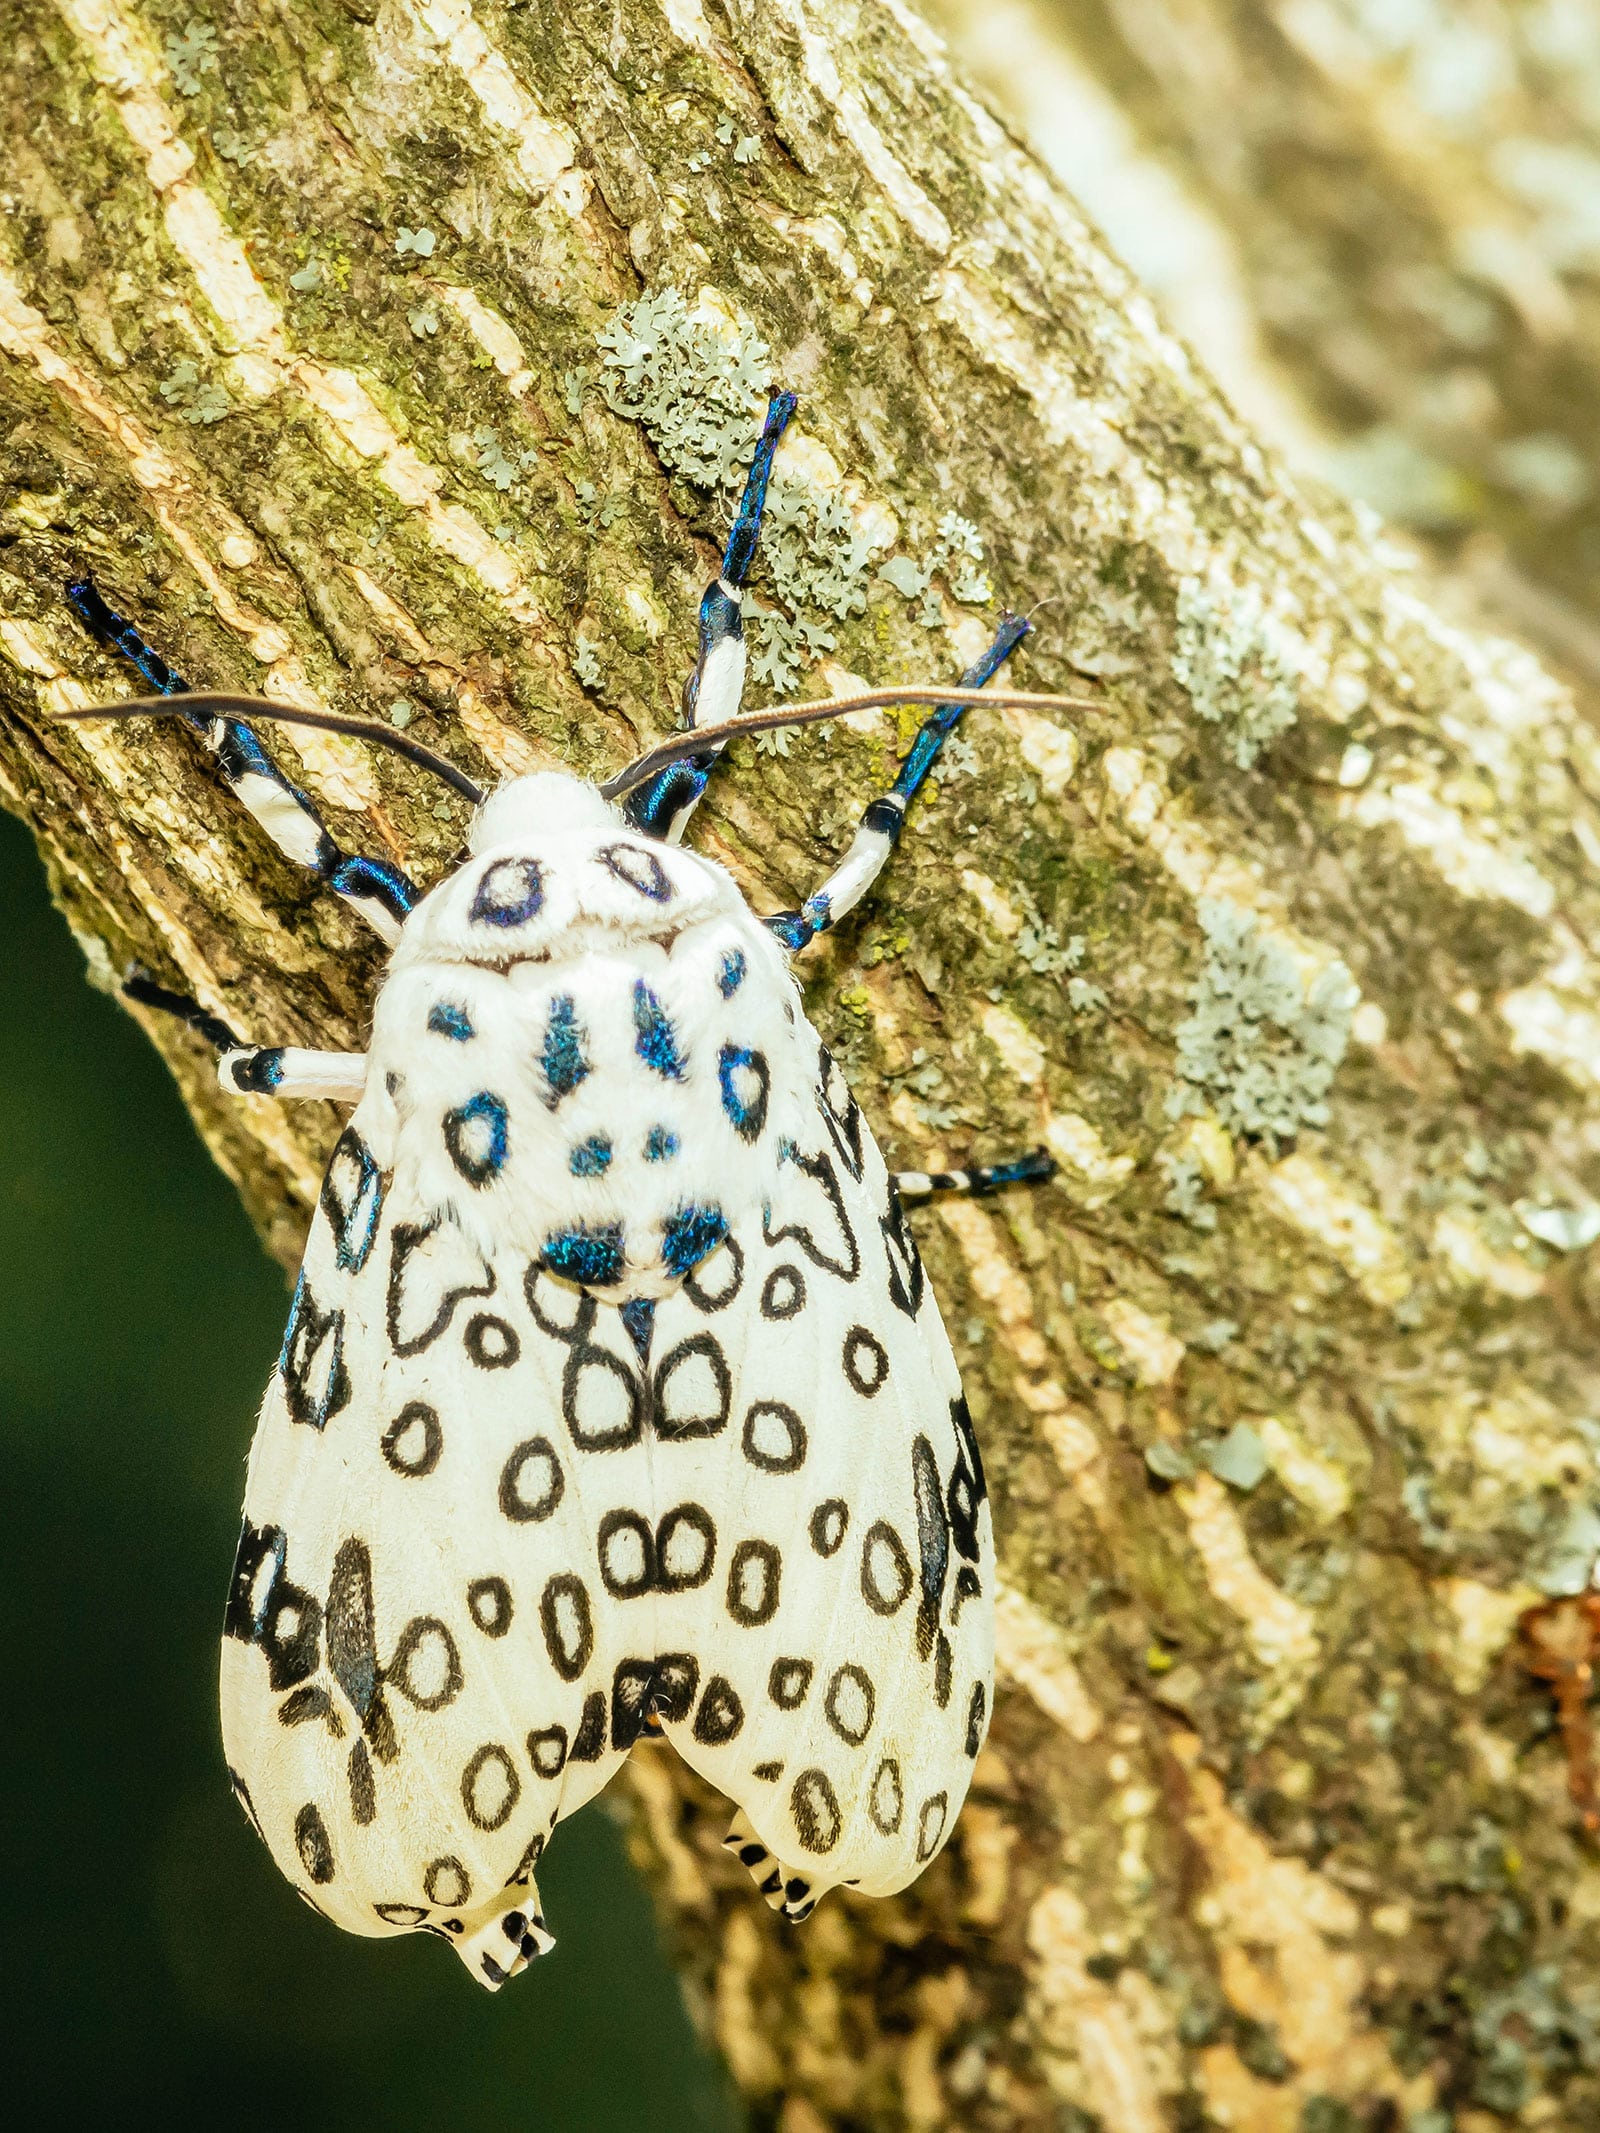 Giant leopard moth sitting on a lichen-dotted tree branch